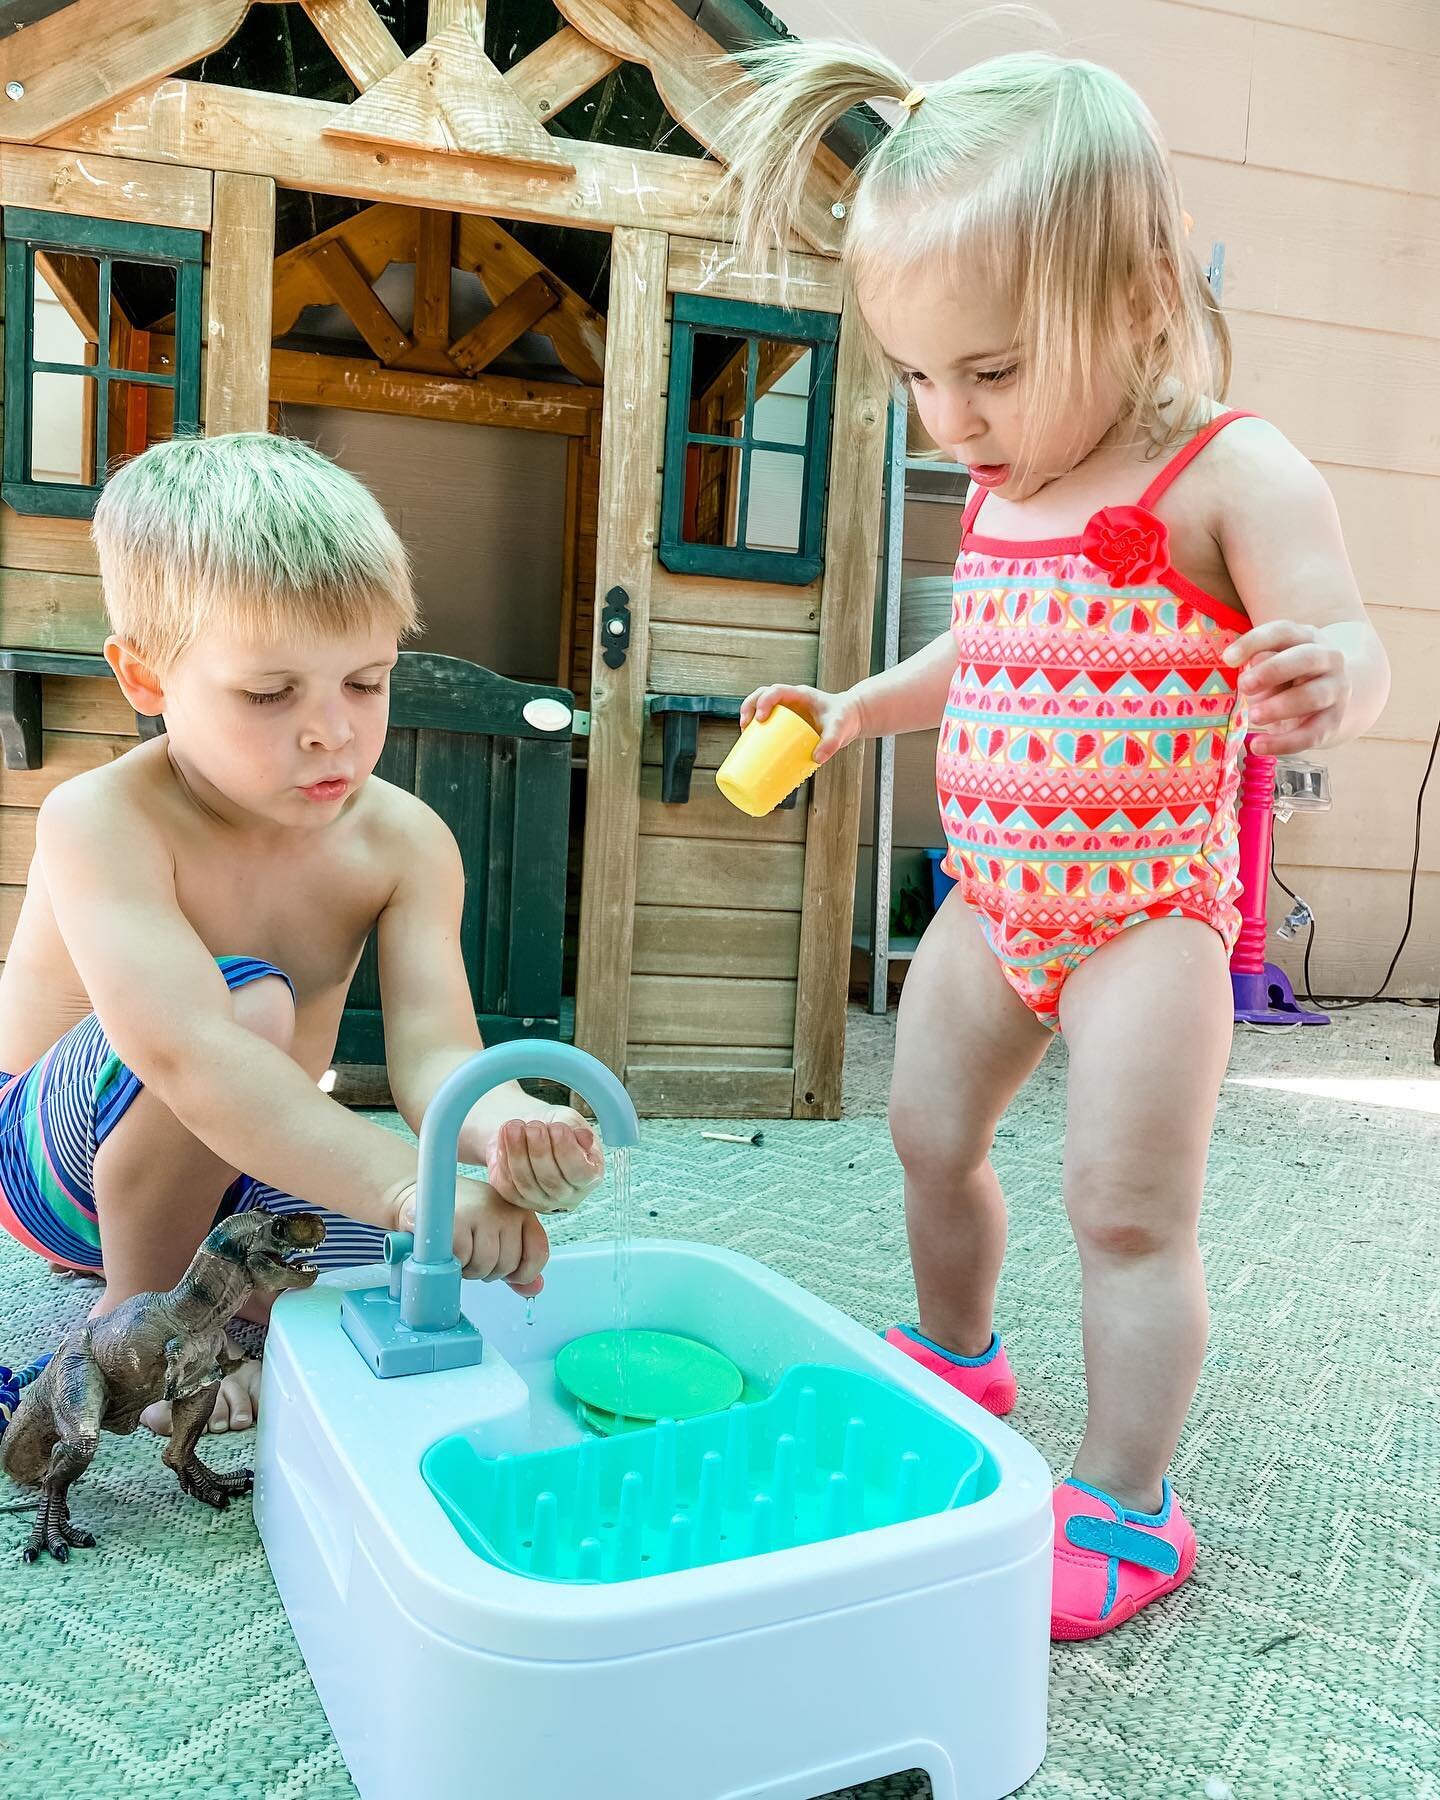 It&rsquo;s already feeling like Summer in Texas and that means LOTS of play! The sun just makes playtime THAT much better, doesn&rsquo;t it?! ☀️ 

Every few months we get a new @lovevery play kit and this last one did NOT disappoint (they never do).
